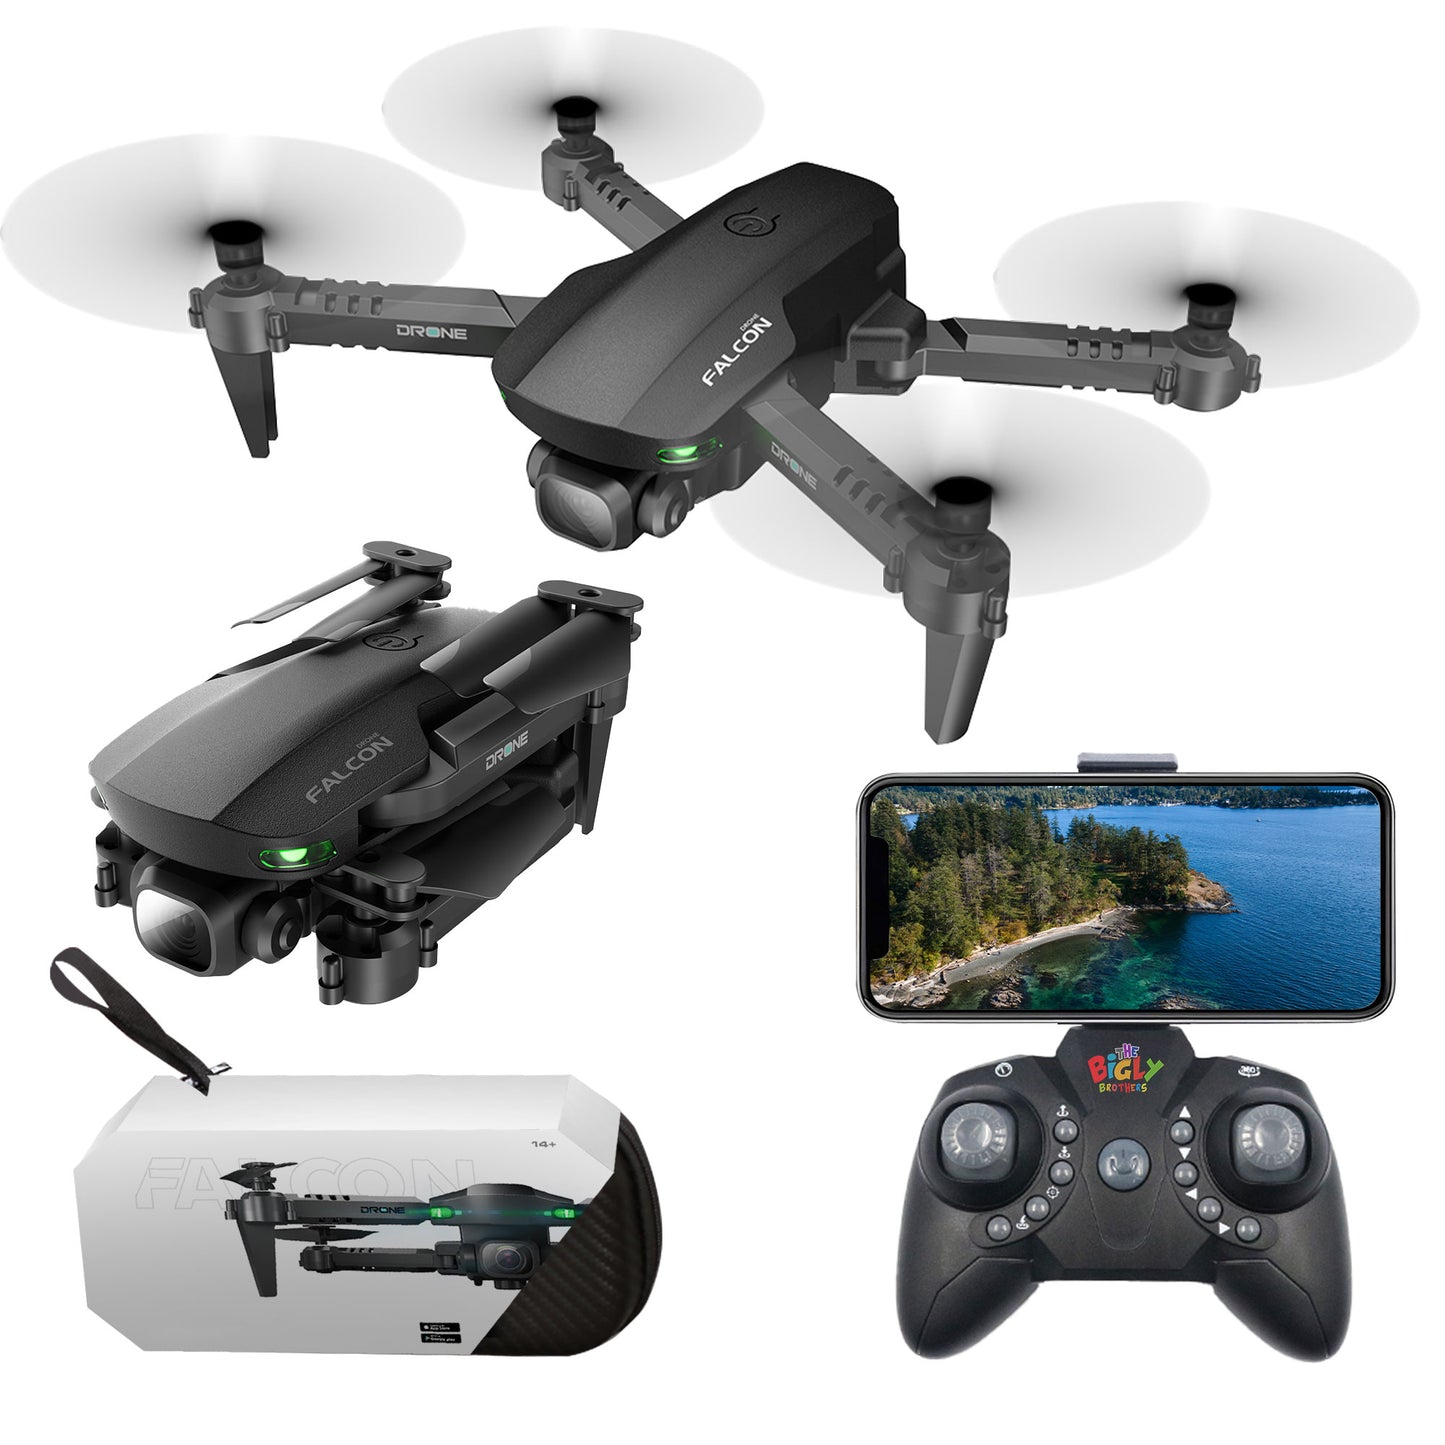 REFURBISHED: The Bigly Brothers E58 Mark III Falcon Mini Drone With HD Camera Headless Mode Professional Foldable Quadcopter Phone Control RC Drone